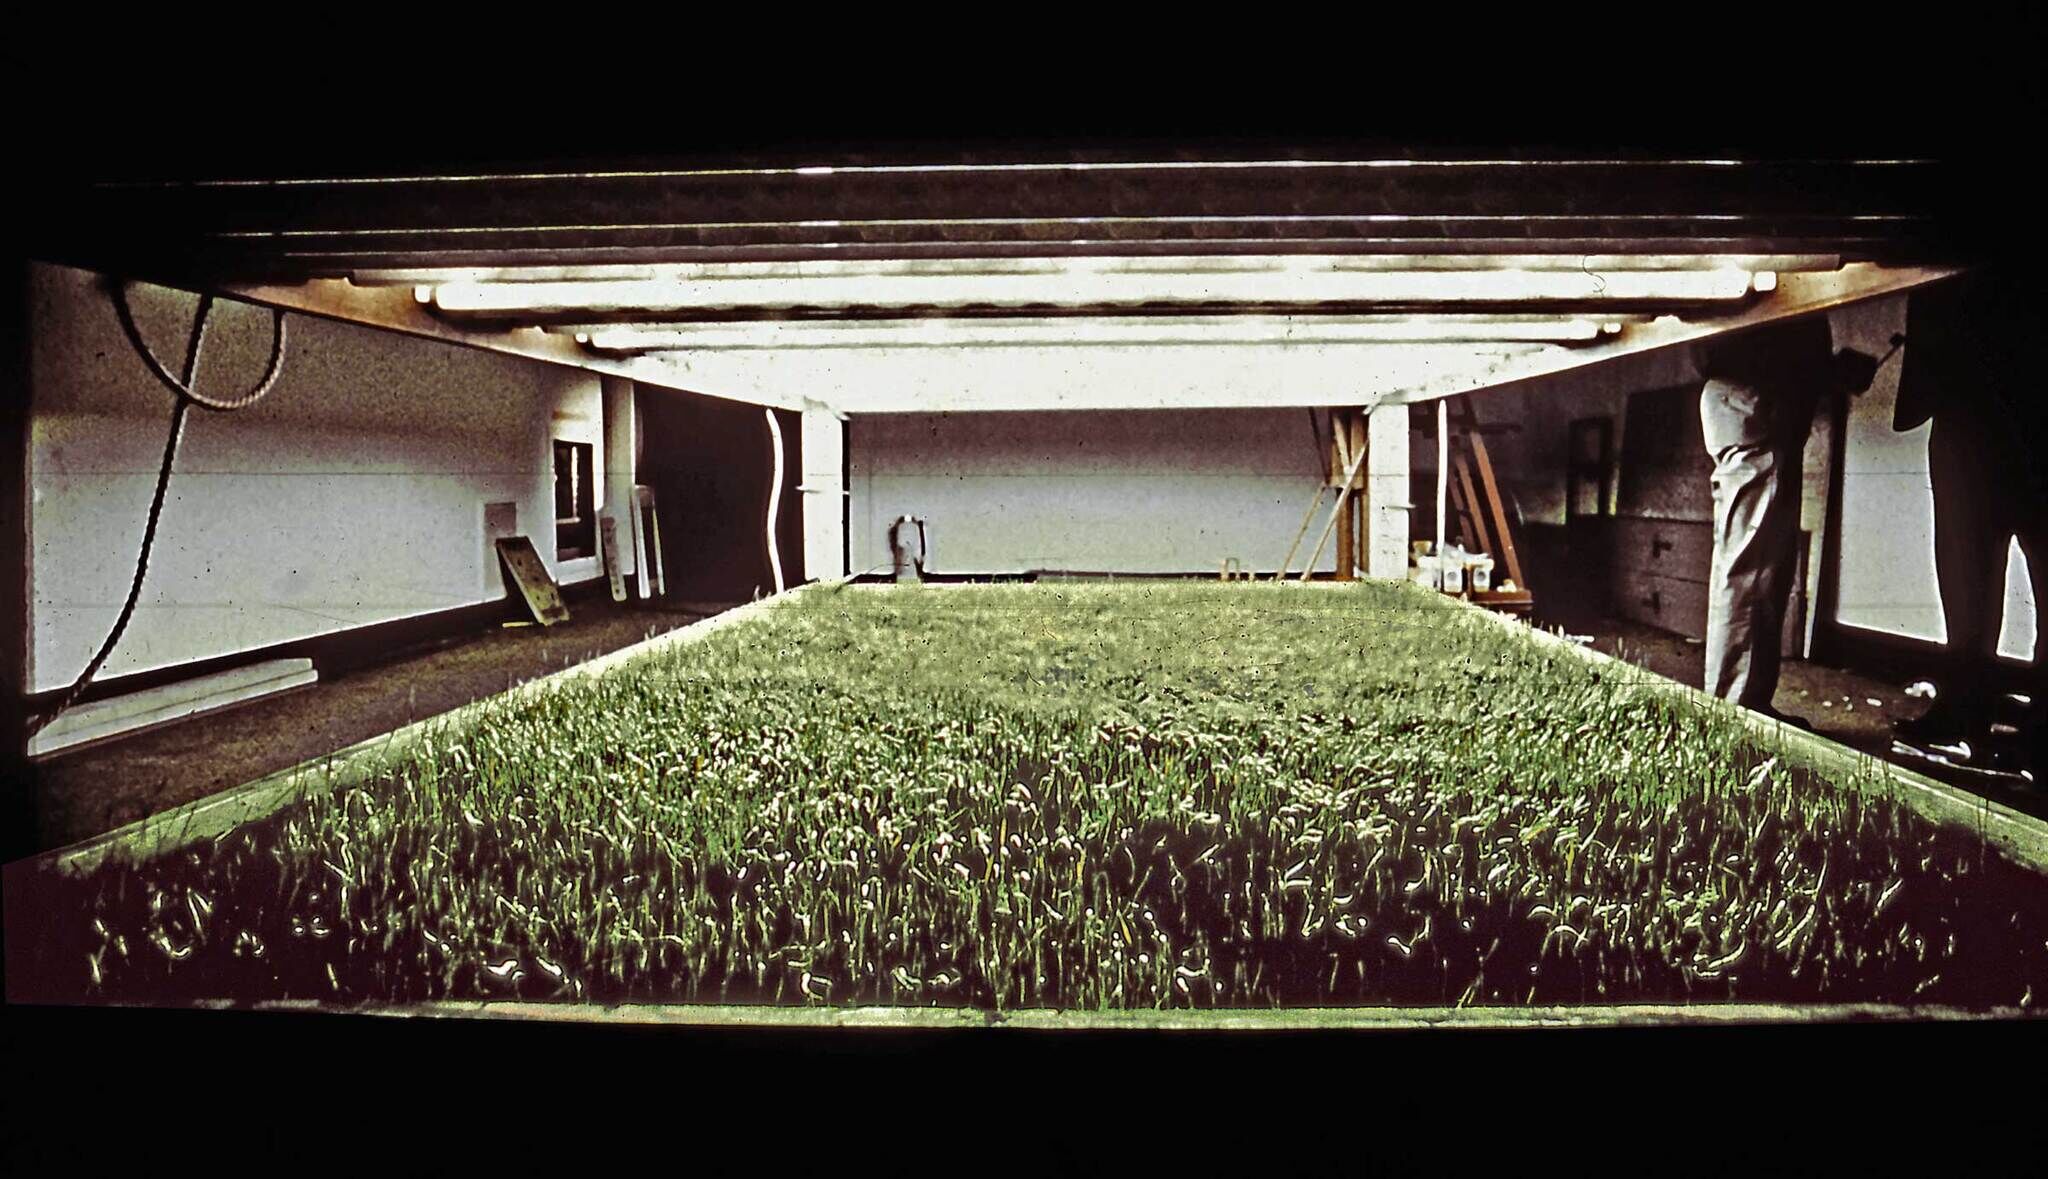 A close-up view of a grass-covered surface under artificial lighting, with two people standing in the background.